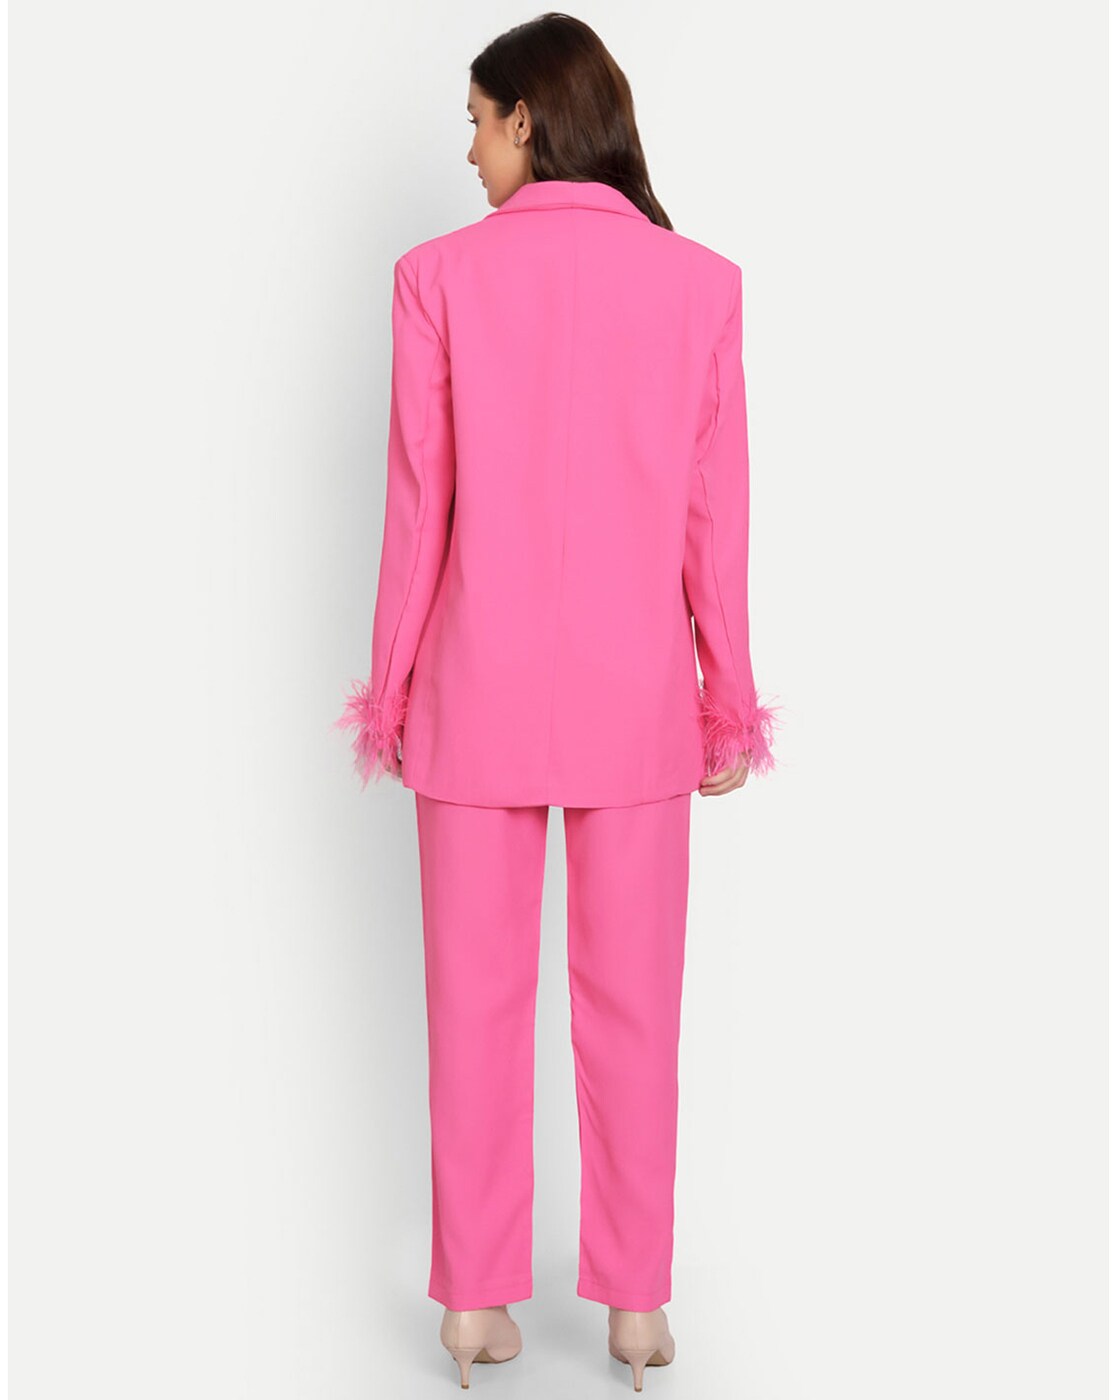 Buy Ladies Suits, Pink 2 Piece Suits for Women, 2-piece Embellished Blazer  and Pants Suits, Midi Pants and Blazer Suit Set, Women's Formal Coats  Online in India 